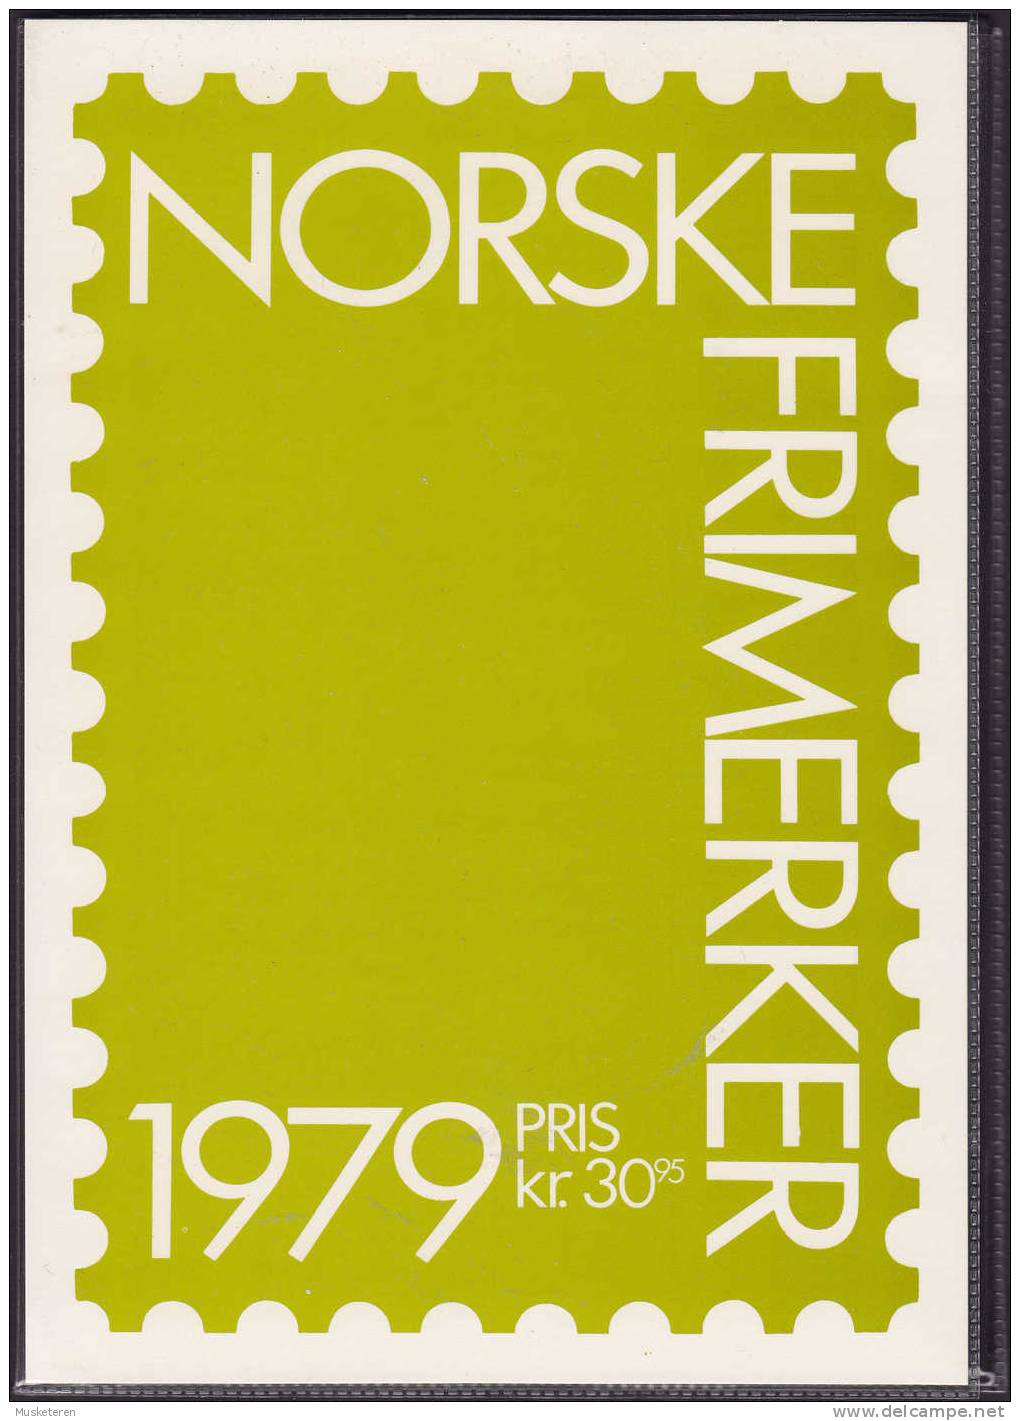 Norway Full Year 1979 Incl. Official Stamp (2 Scans) MNH** - Años Completos